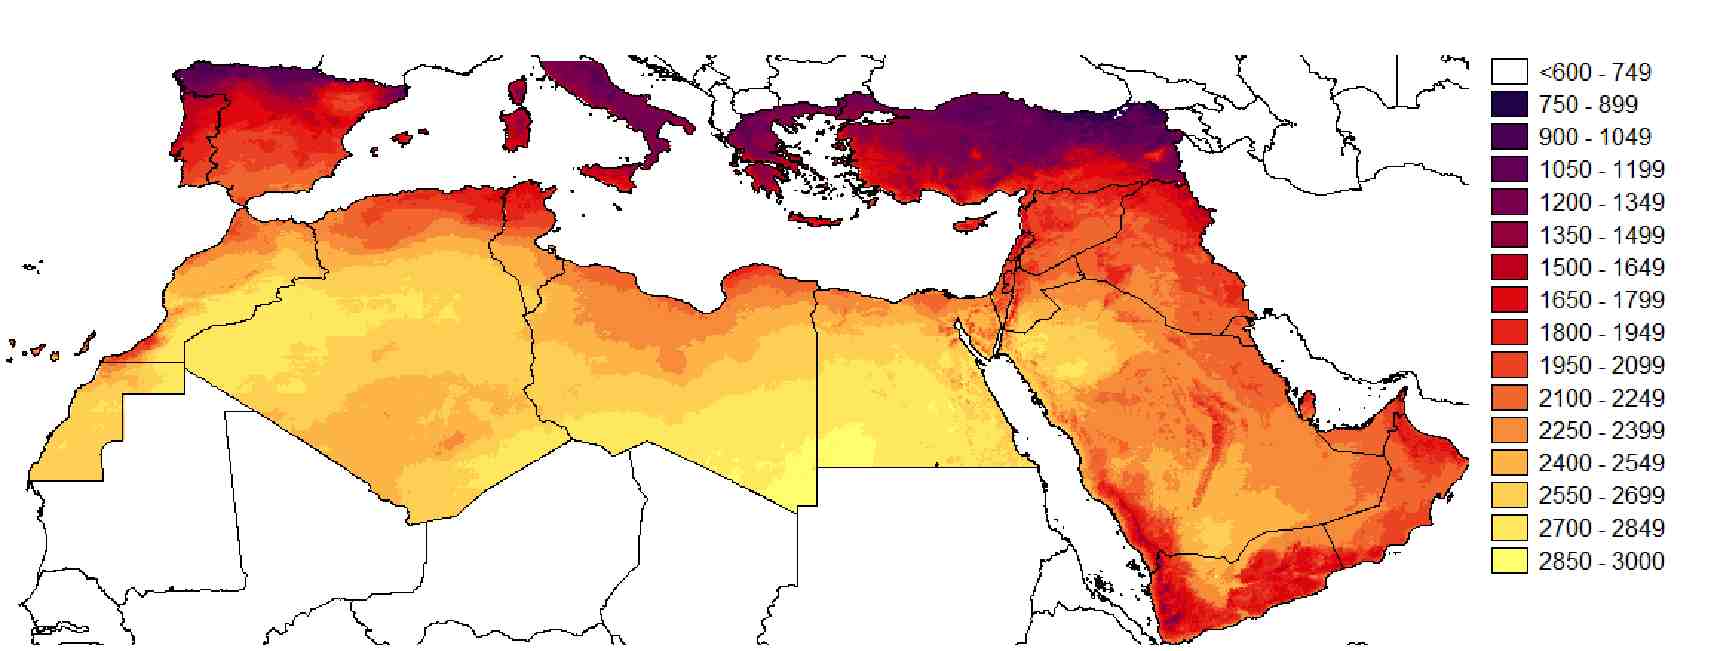 Figure 2: Annual direct normal irradiance in the Mediterranean region in the year 2002 in kWh/m2.